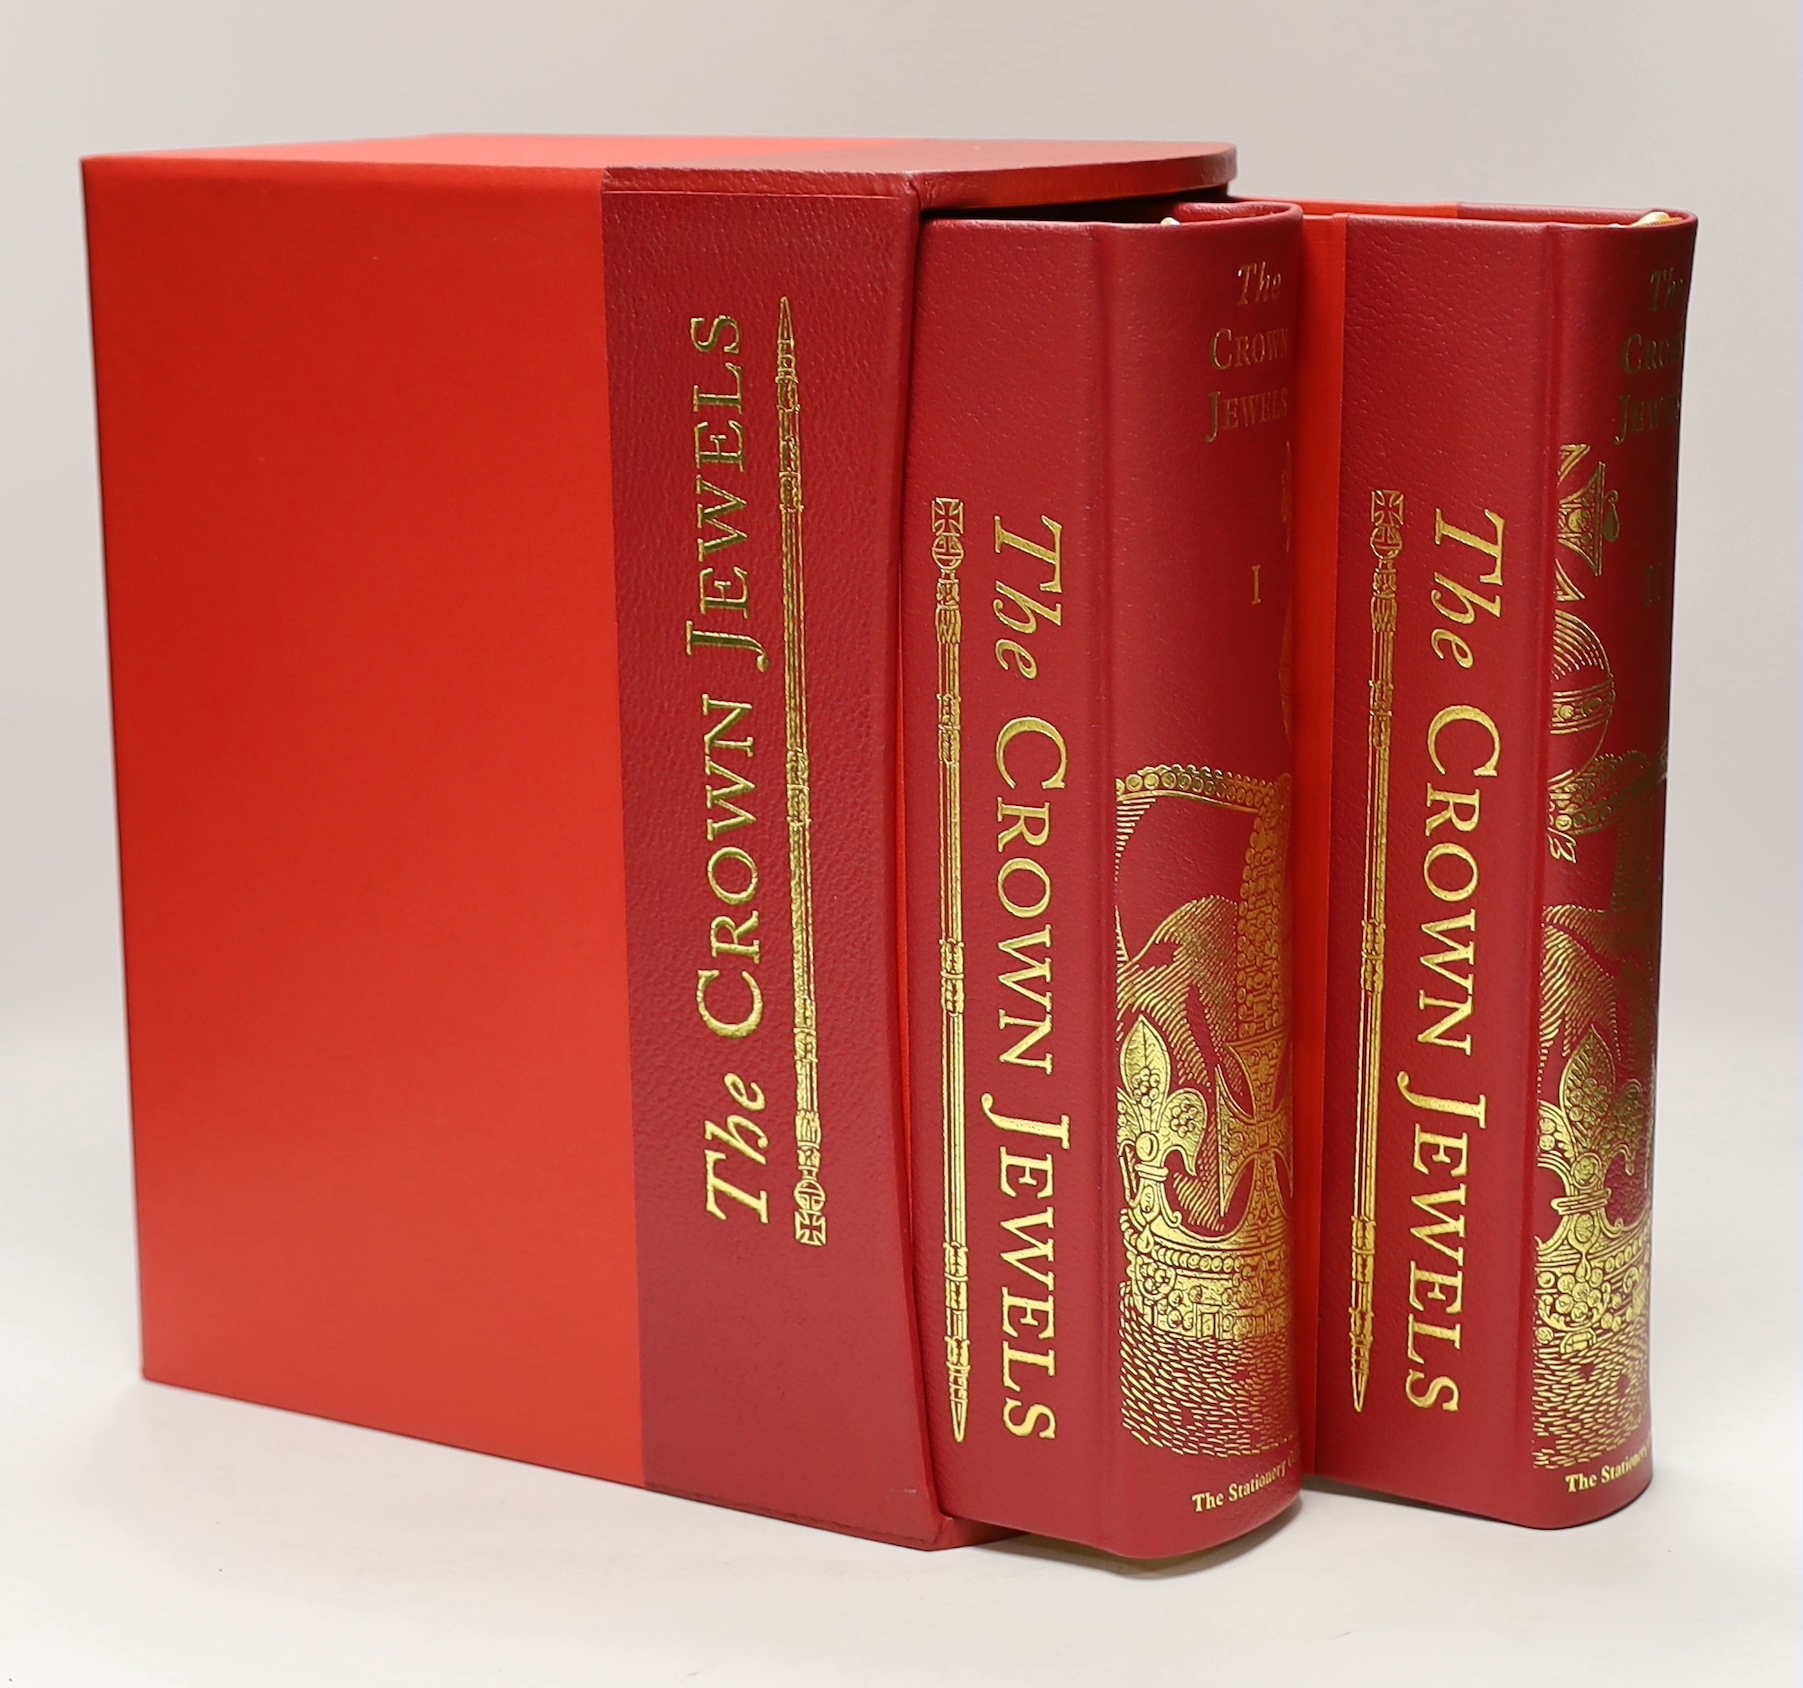 Blair, Claude (editor) - The Crown Jewels: The History of the Coronation Regalia in the Jewel House of the Tower of London, 2 vols, one of 650, signed by Hugh Roberts, 4to, quarter red morocco and red cloth, H.M Statione